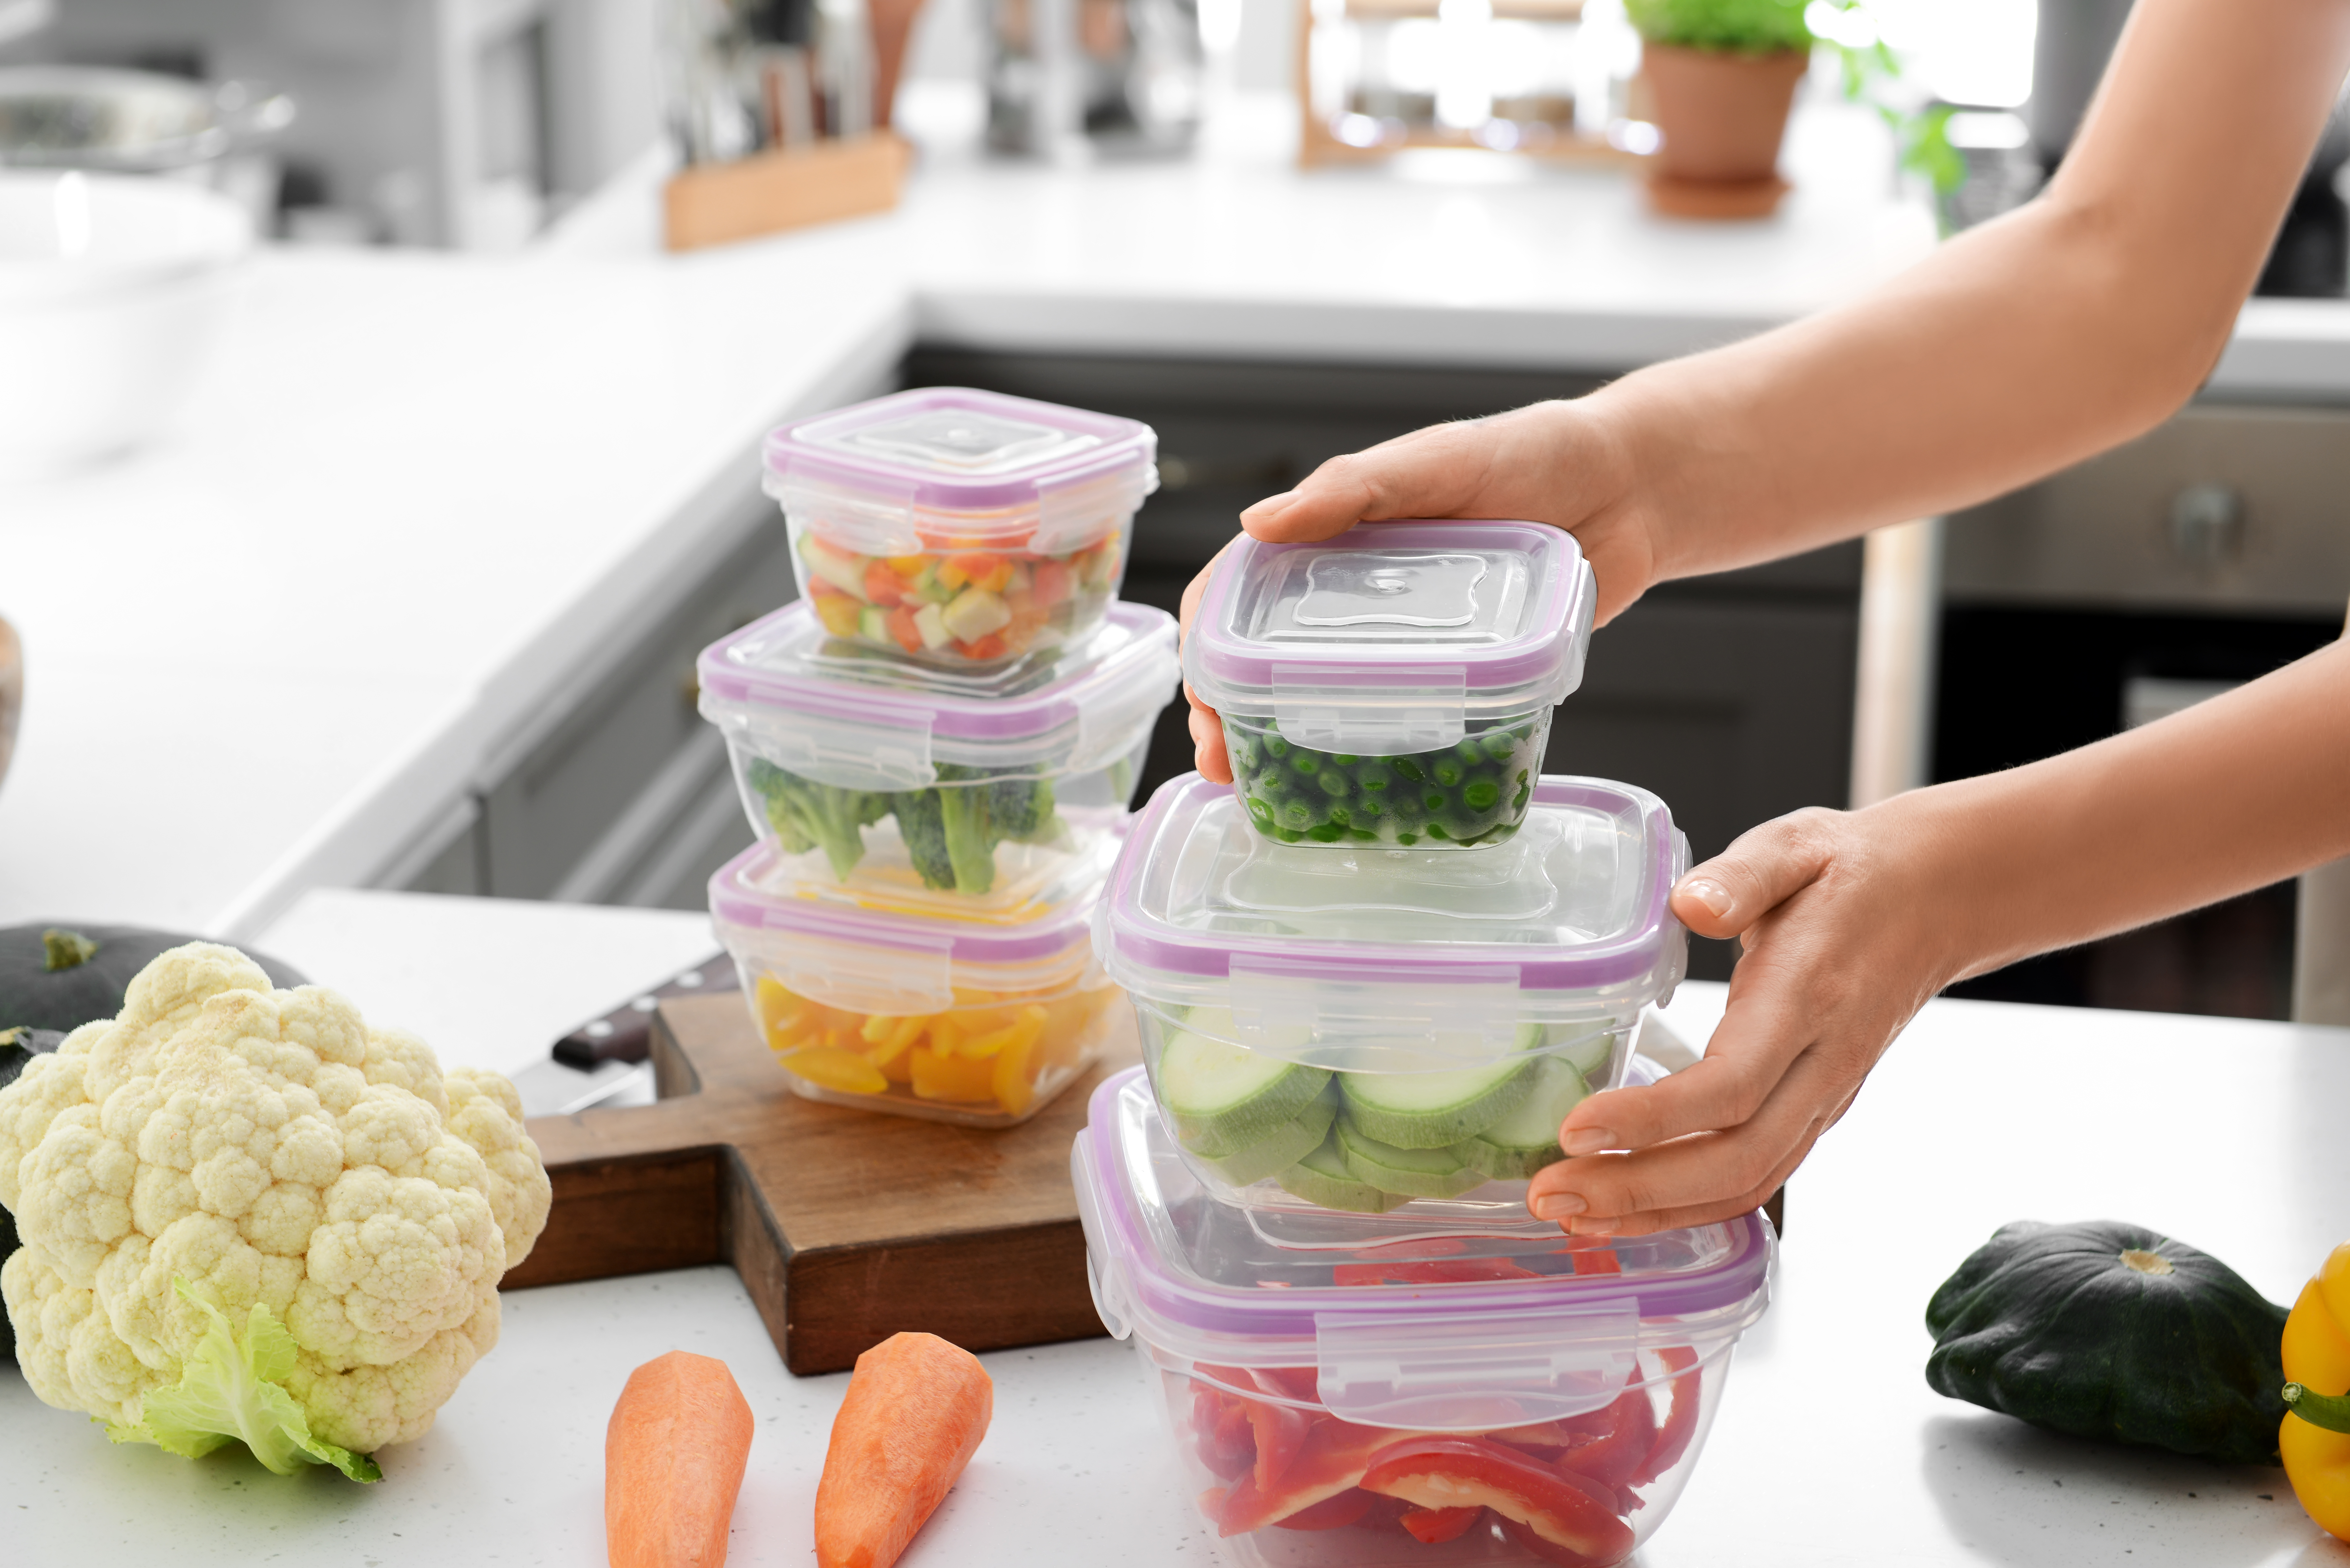 Woman holding stack of plastic containers with fresh vegetables for freezing at table in kitchen | Source: Shutterstock